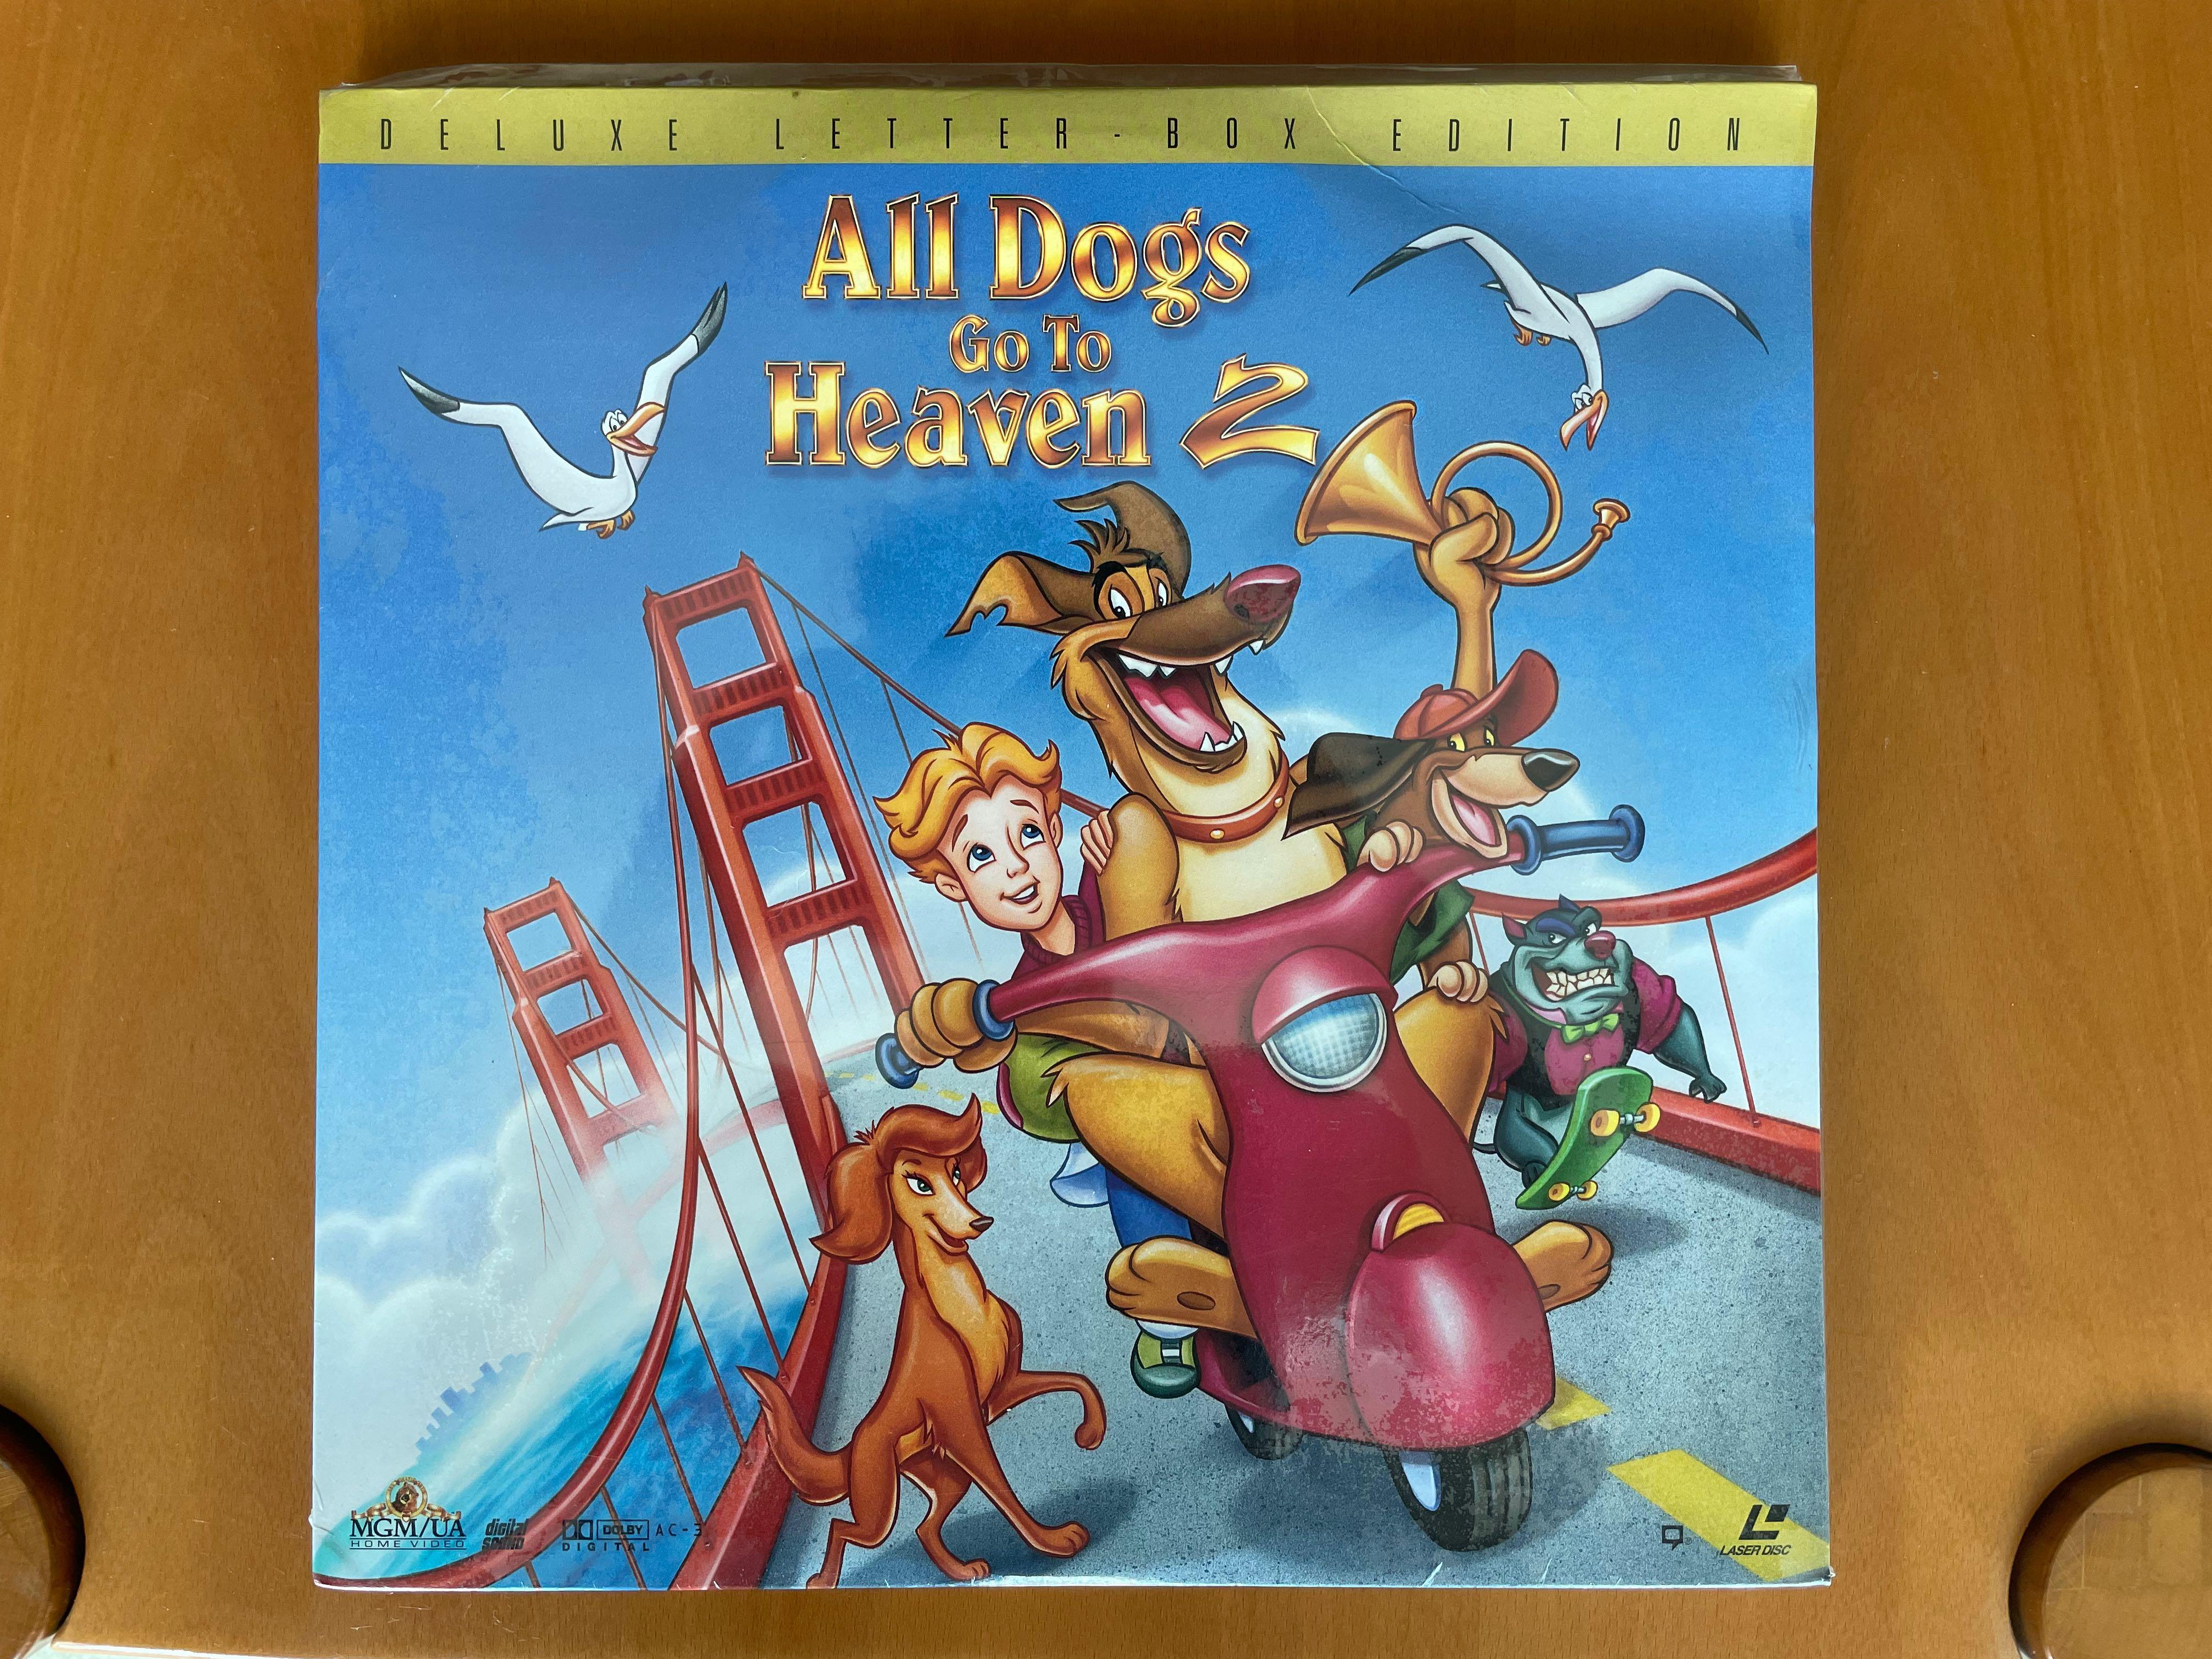 All Dogs Go to Heaven 2 (1996) (Laser Disc), 興趣及遊戲, 收藏品及